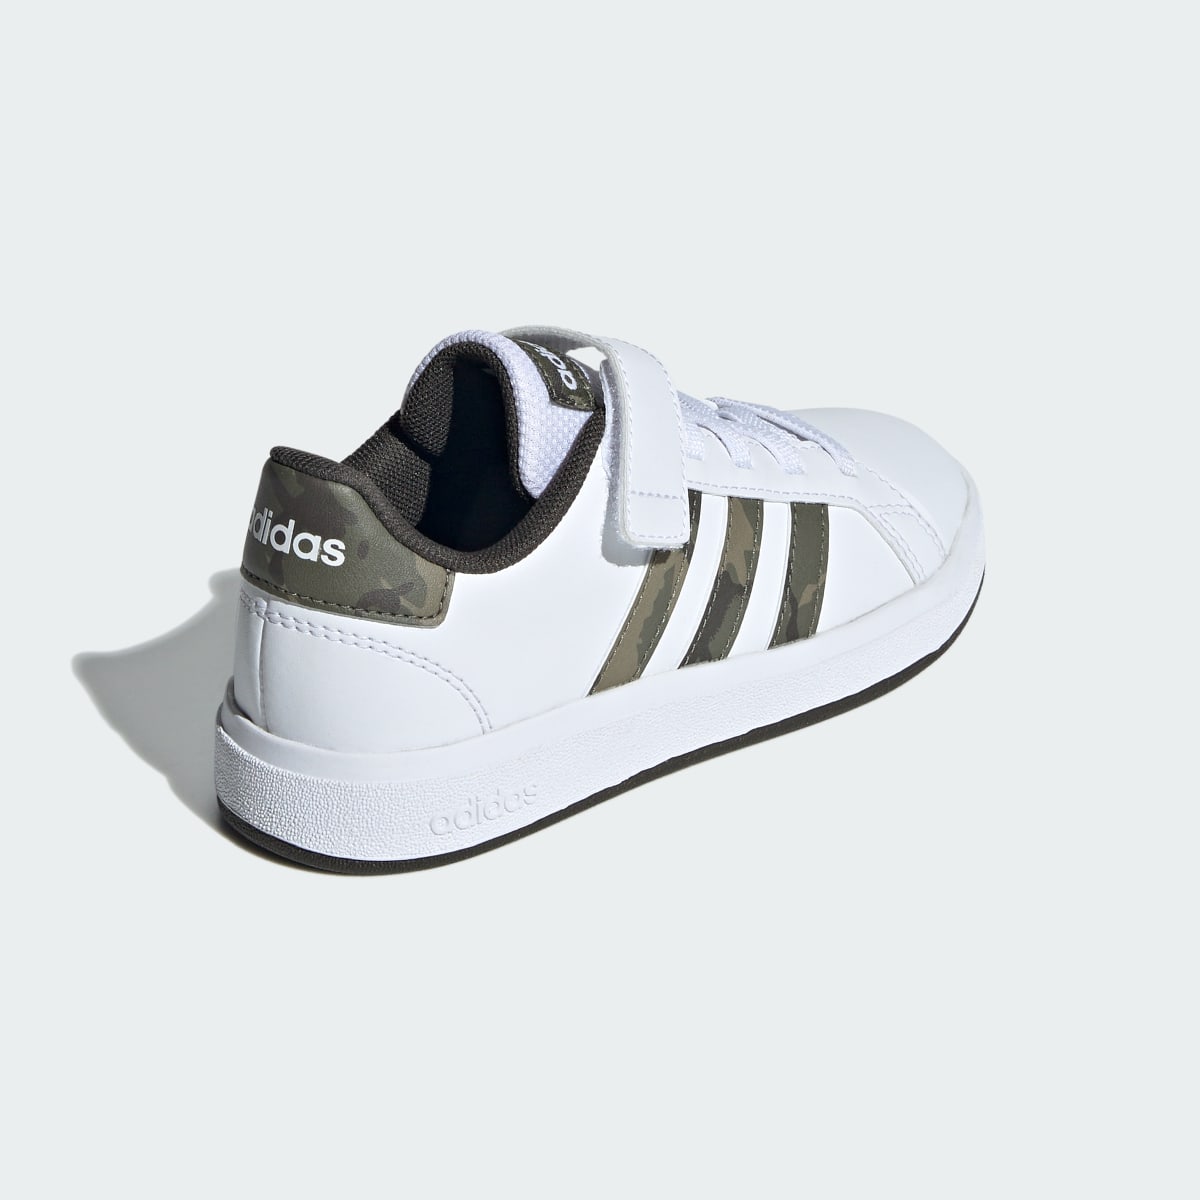 Adidas Grand Court 2.0 Shoes Kids. 6